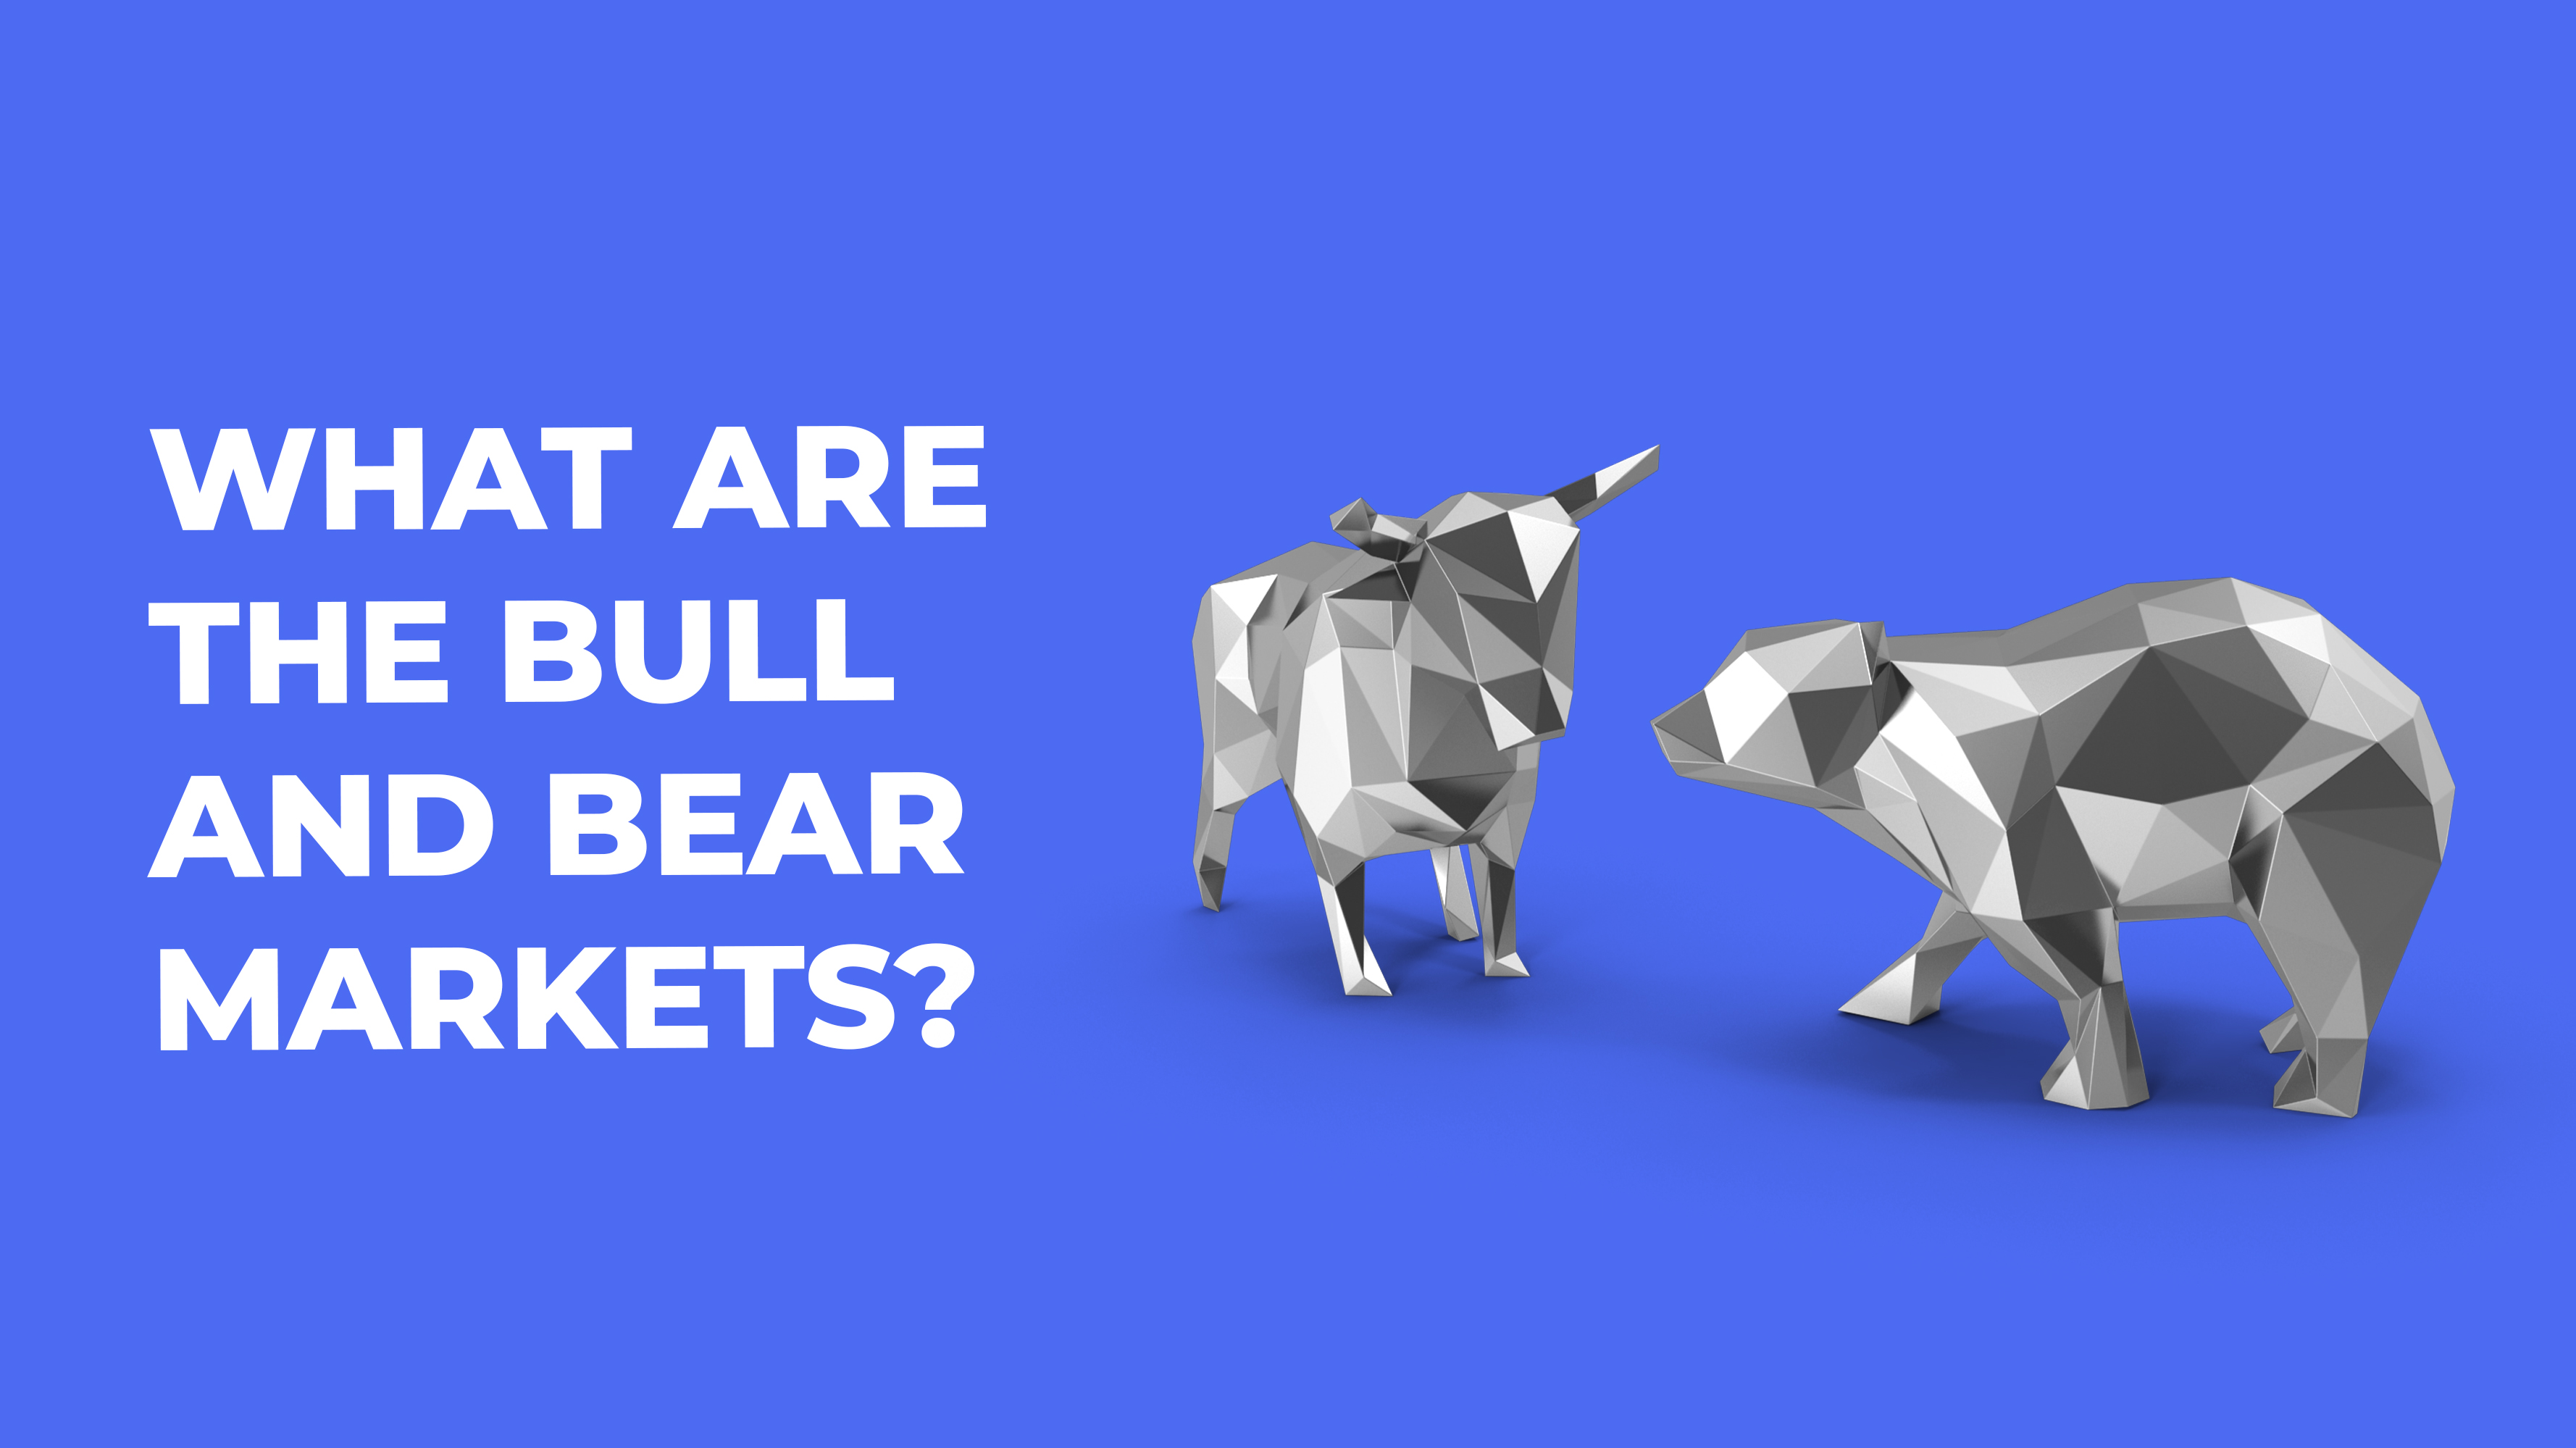 Bull vs Bear markets: how to determine and earn more